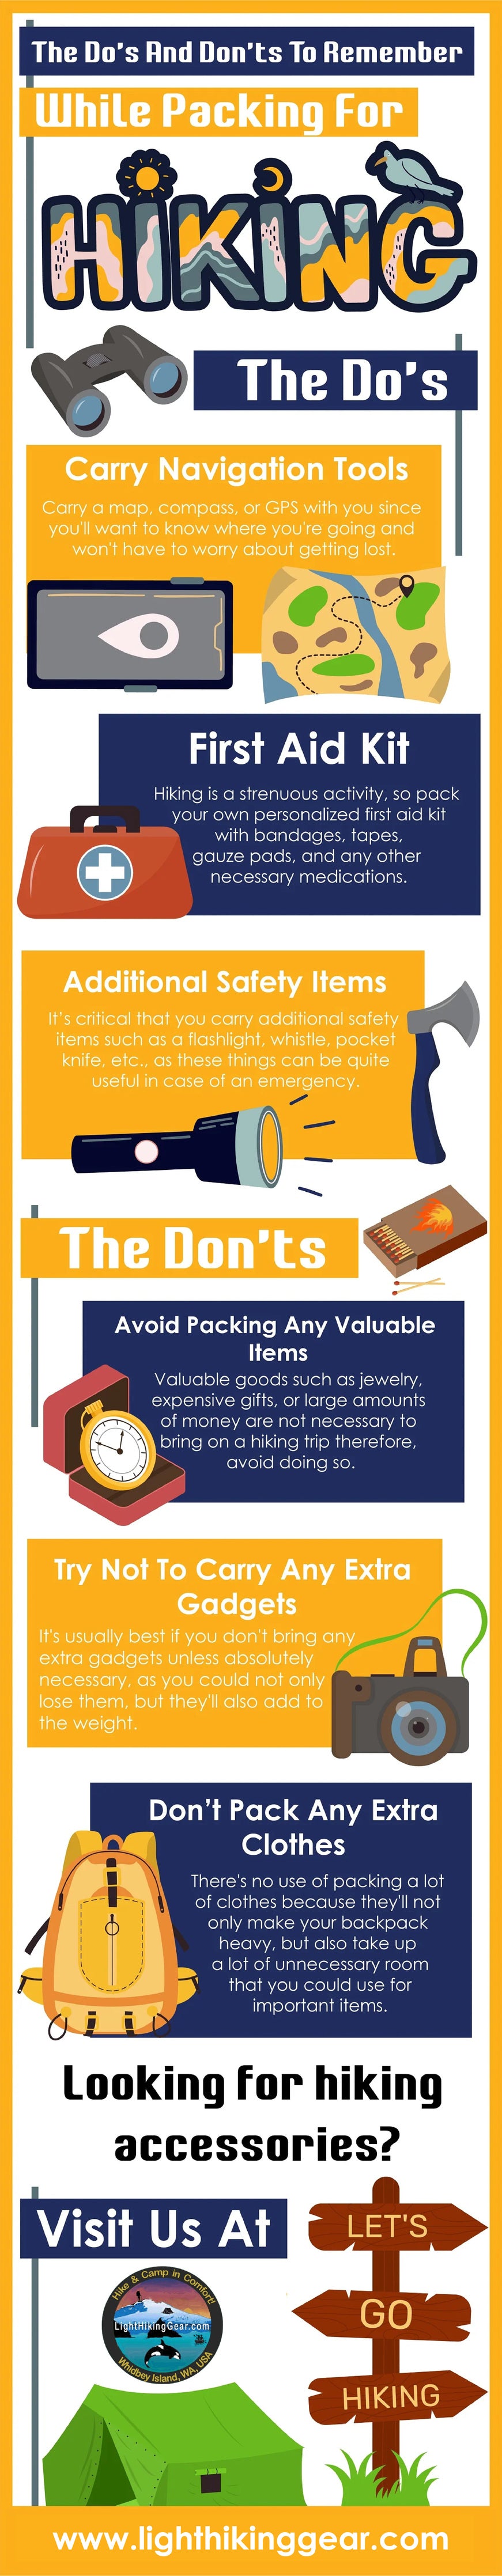 The Do's And Don'ts To Remember While Packing For Hiking | Infographic